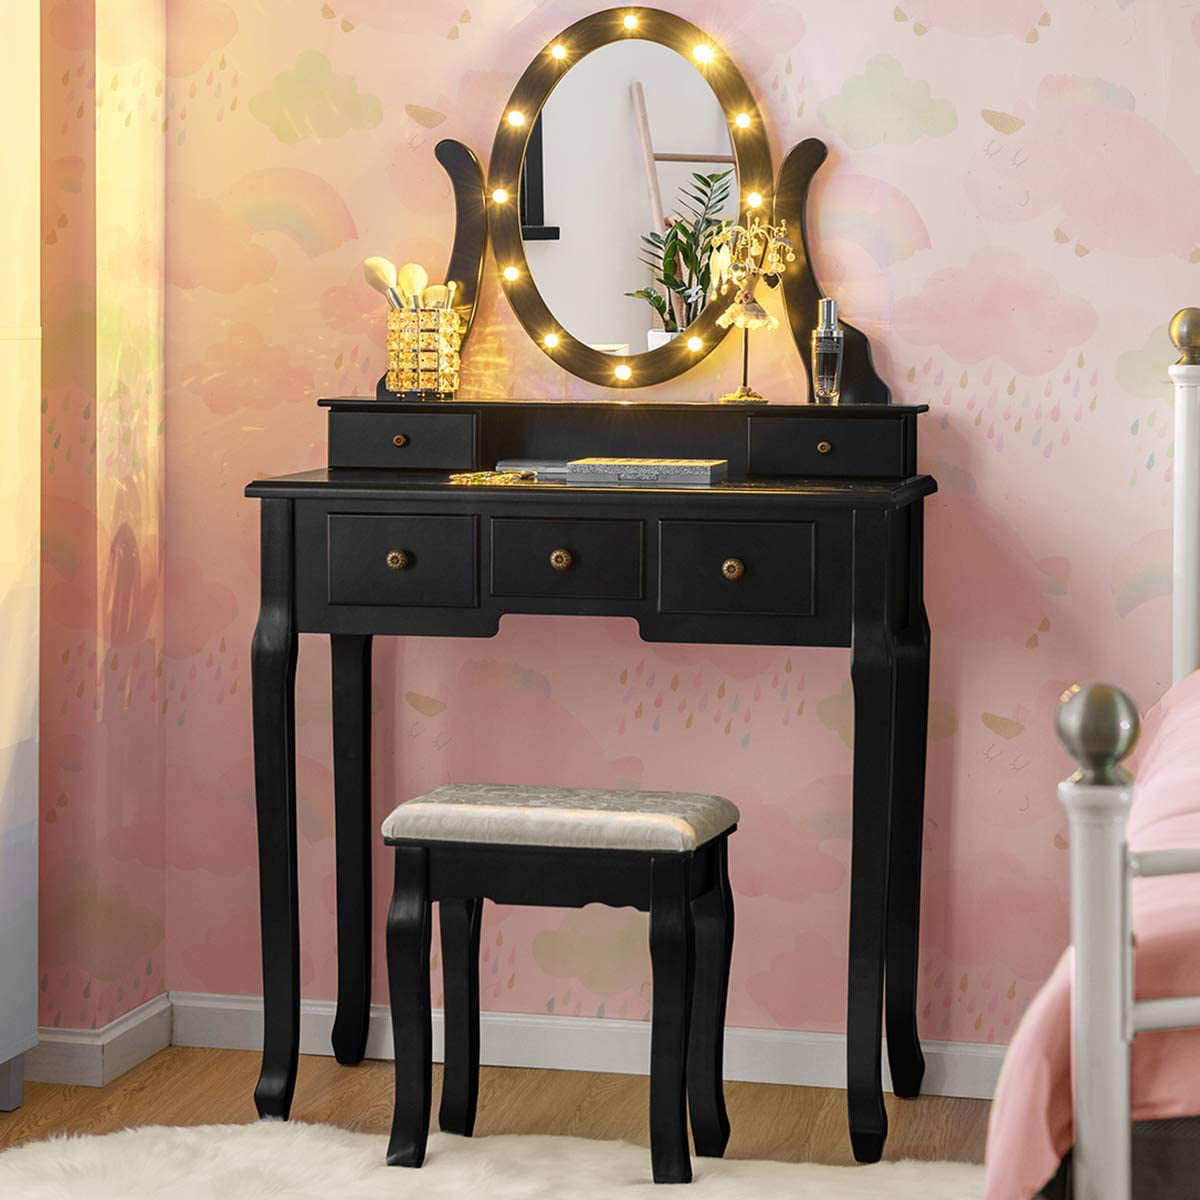 Details about   Vanity Makeup Table Set Folding Mirror 5 Drawers W/ Stool Stylish Dressing NEW 